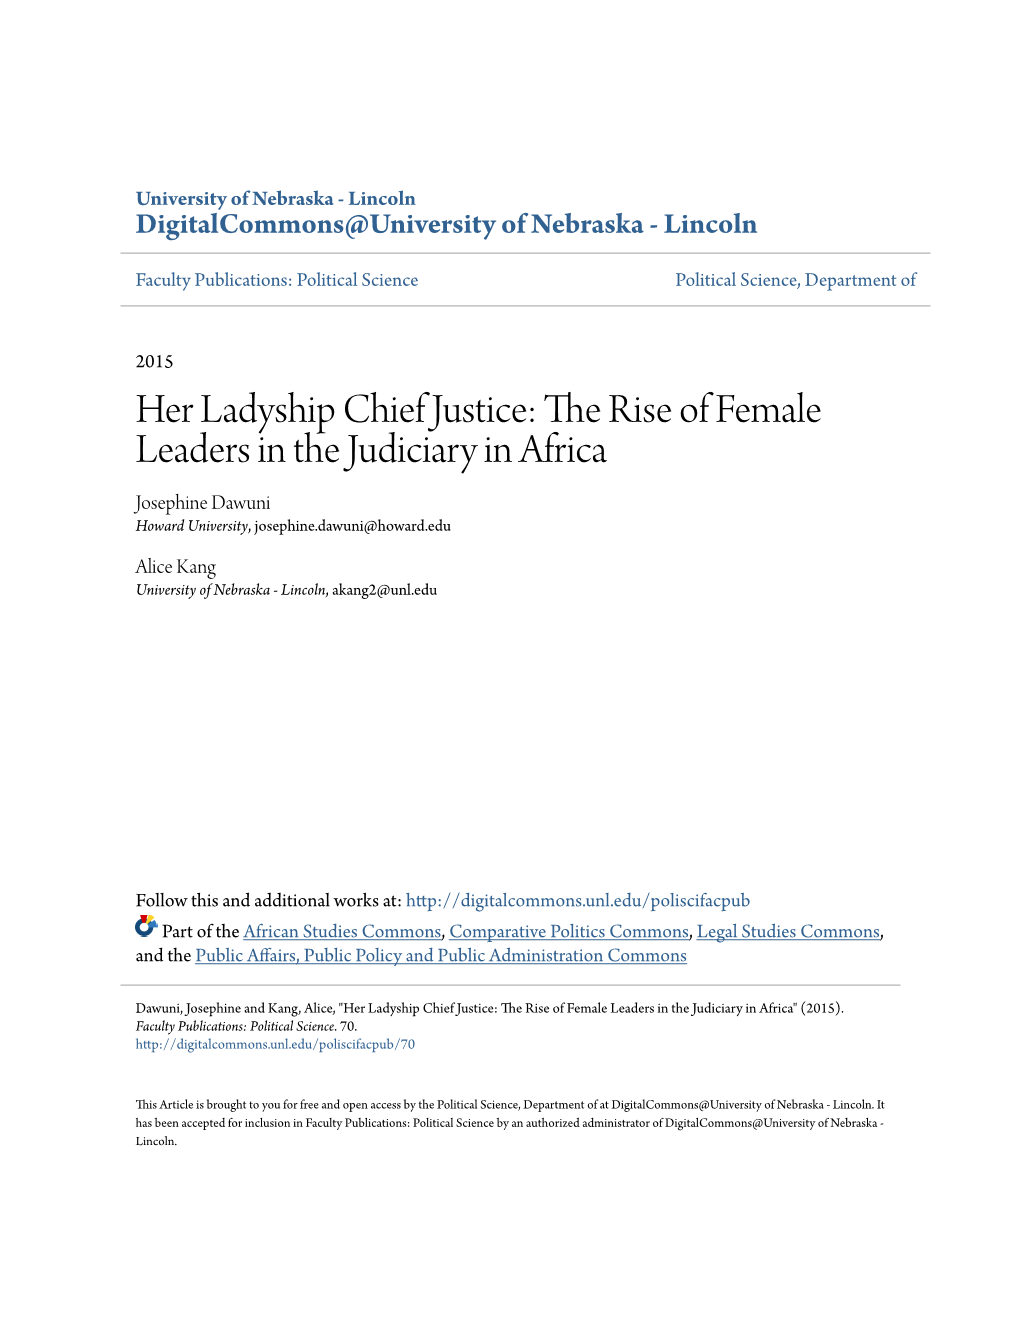 Chief Justice: the Rise of Female Leaders in the Judiciary in Africa Josephine Dawuni Howard University, Josephine.Dawuni@Howard.Edu